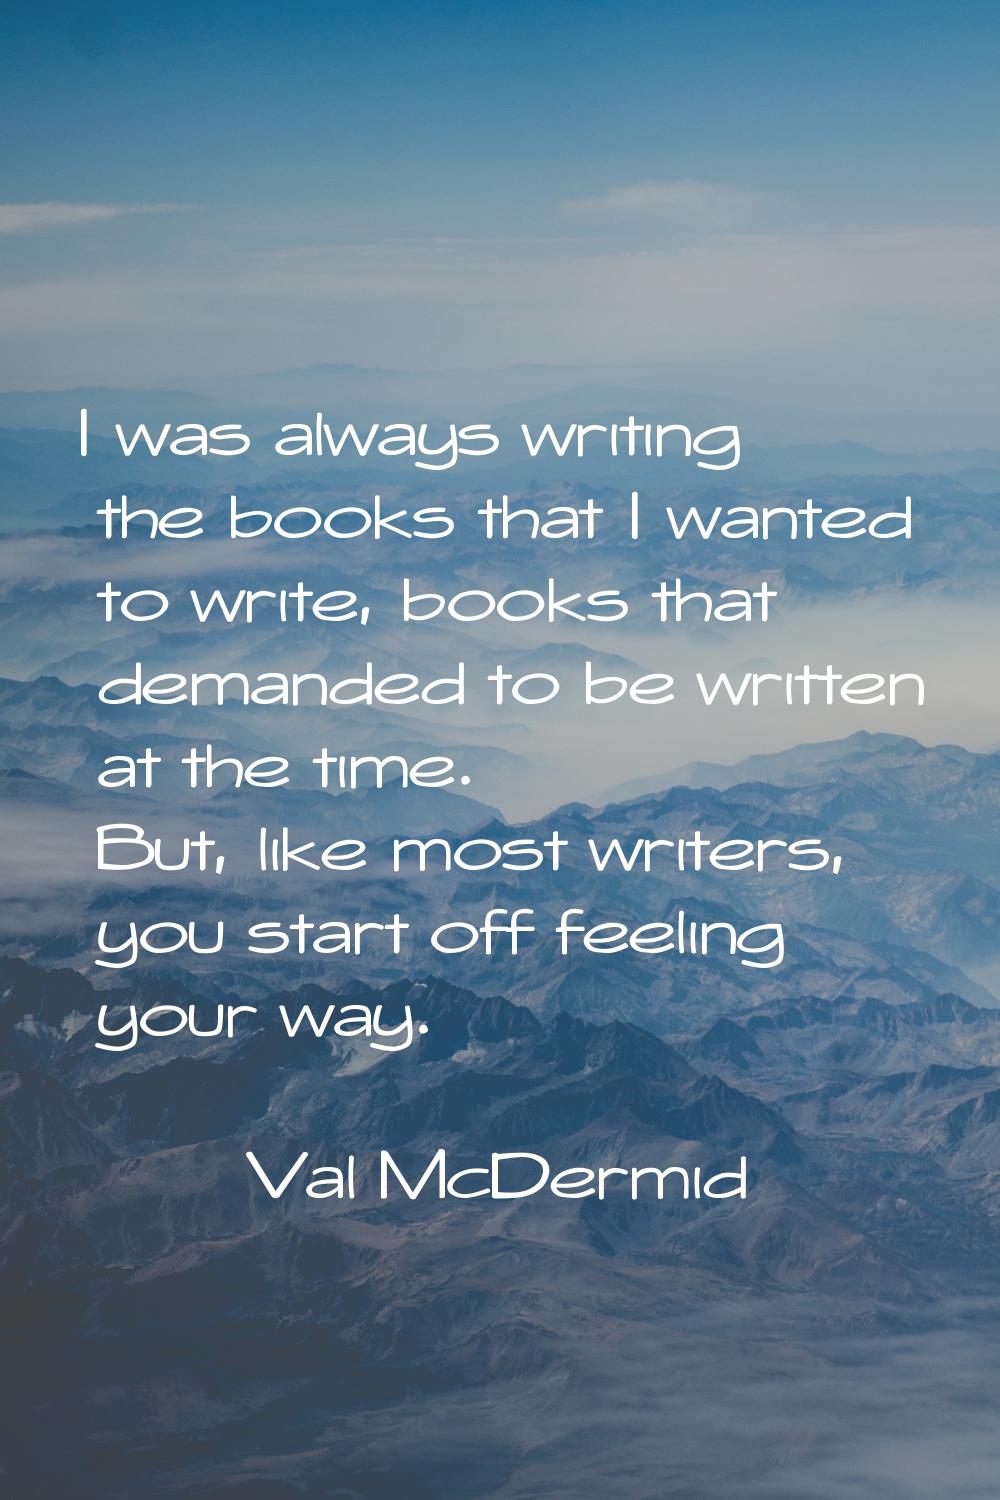 I was always writing the books that I wanted to write, books that demanded to be written at the tim